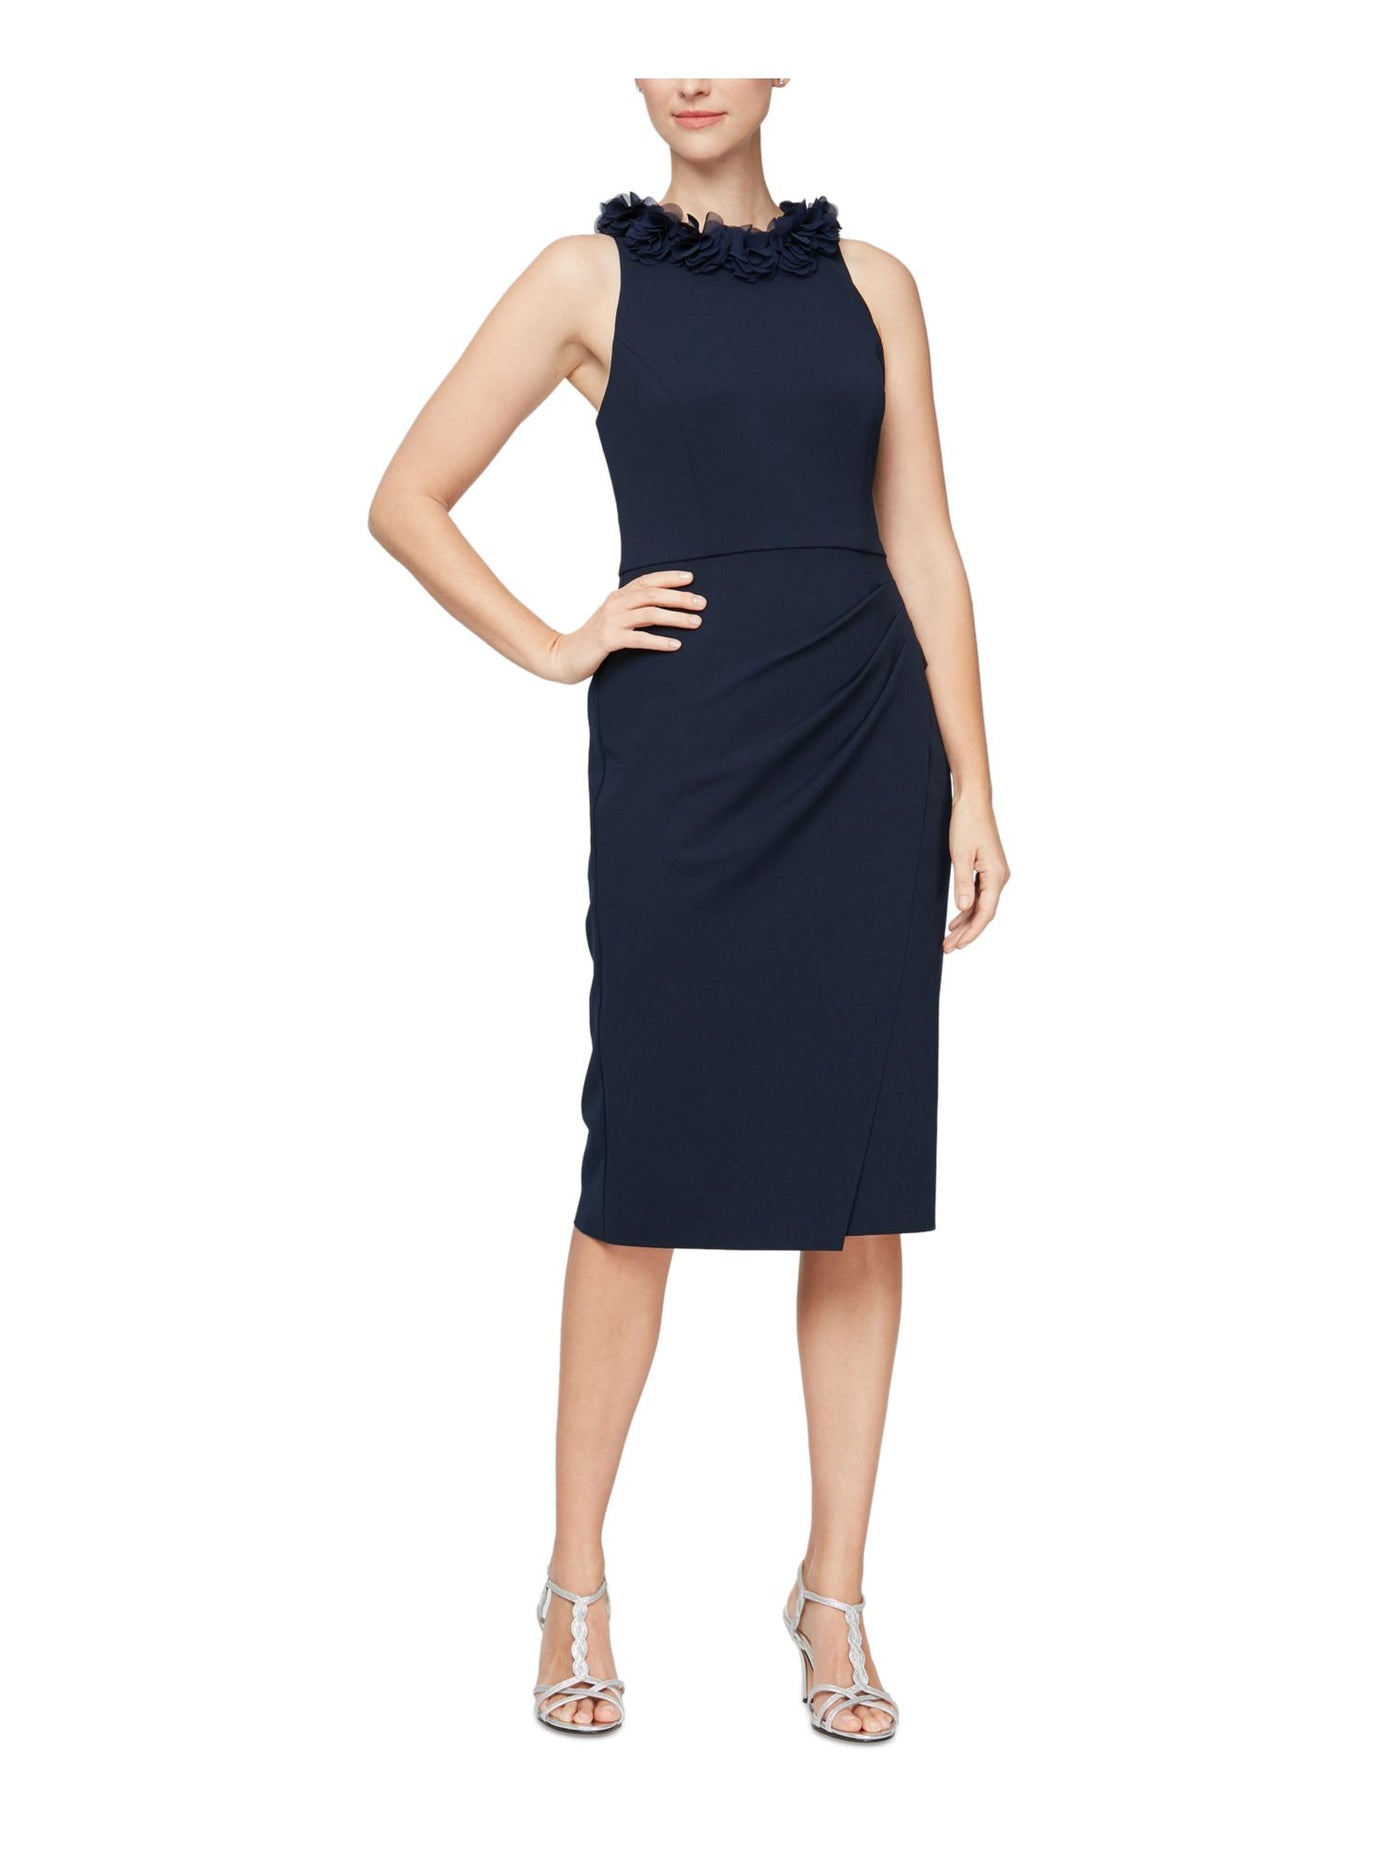 ALEX & EVE BY ALEX EVENINGS Womens Navy Zippered Pleated Wrap Look Lined Bodice Sleeveless Round Neck Below The Knee Evening Sheath Dress 14